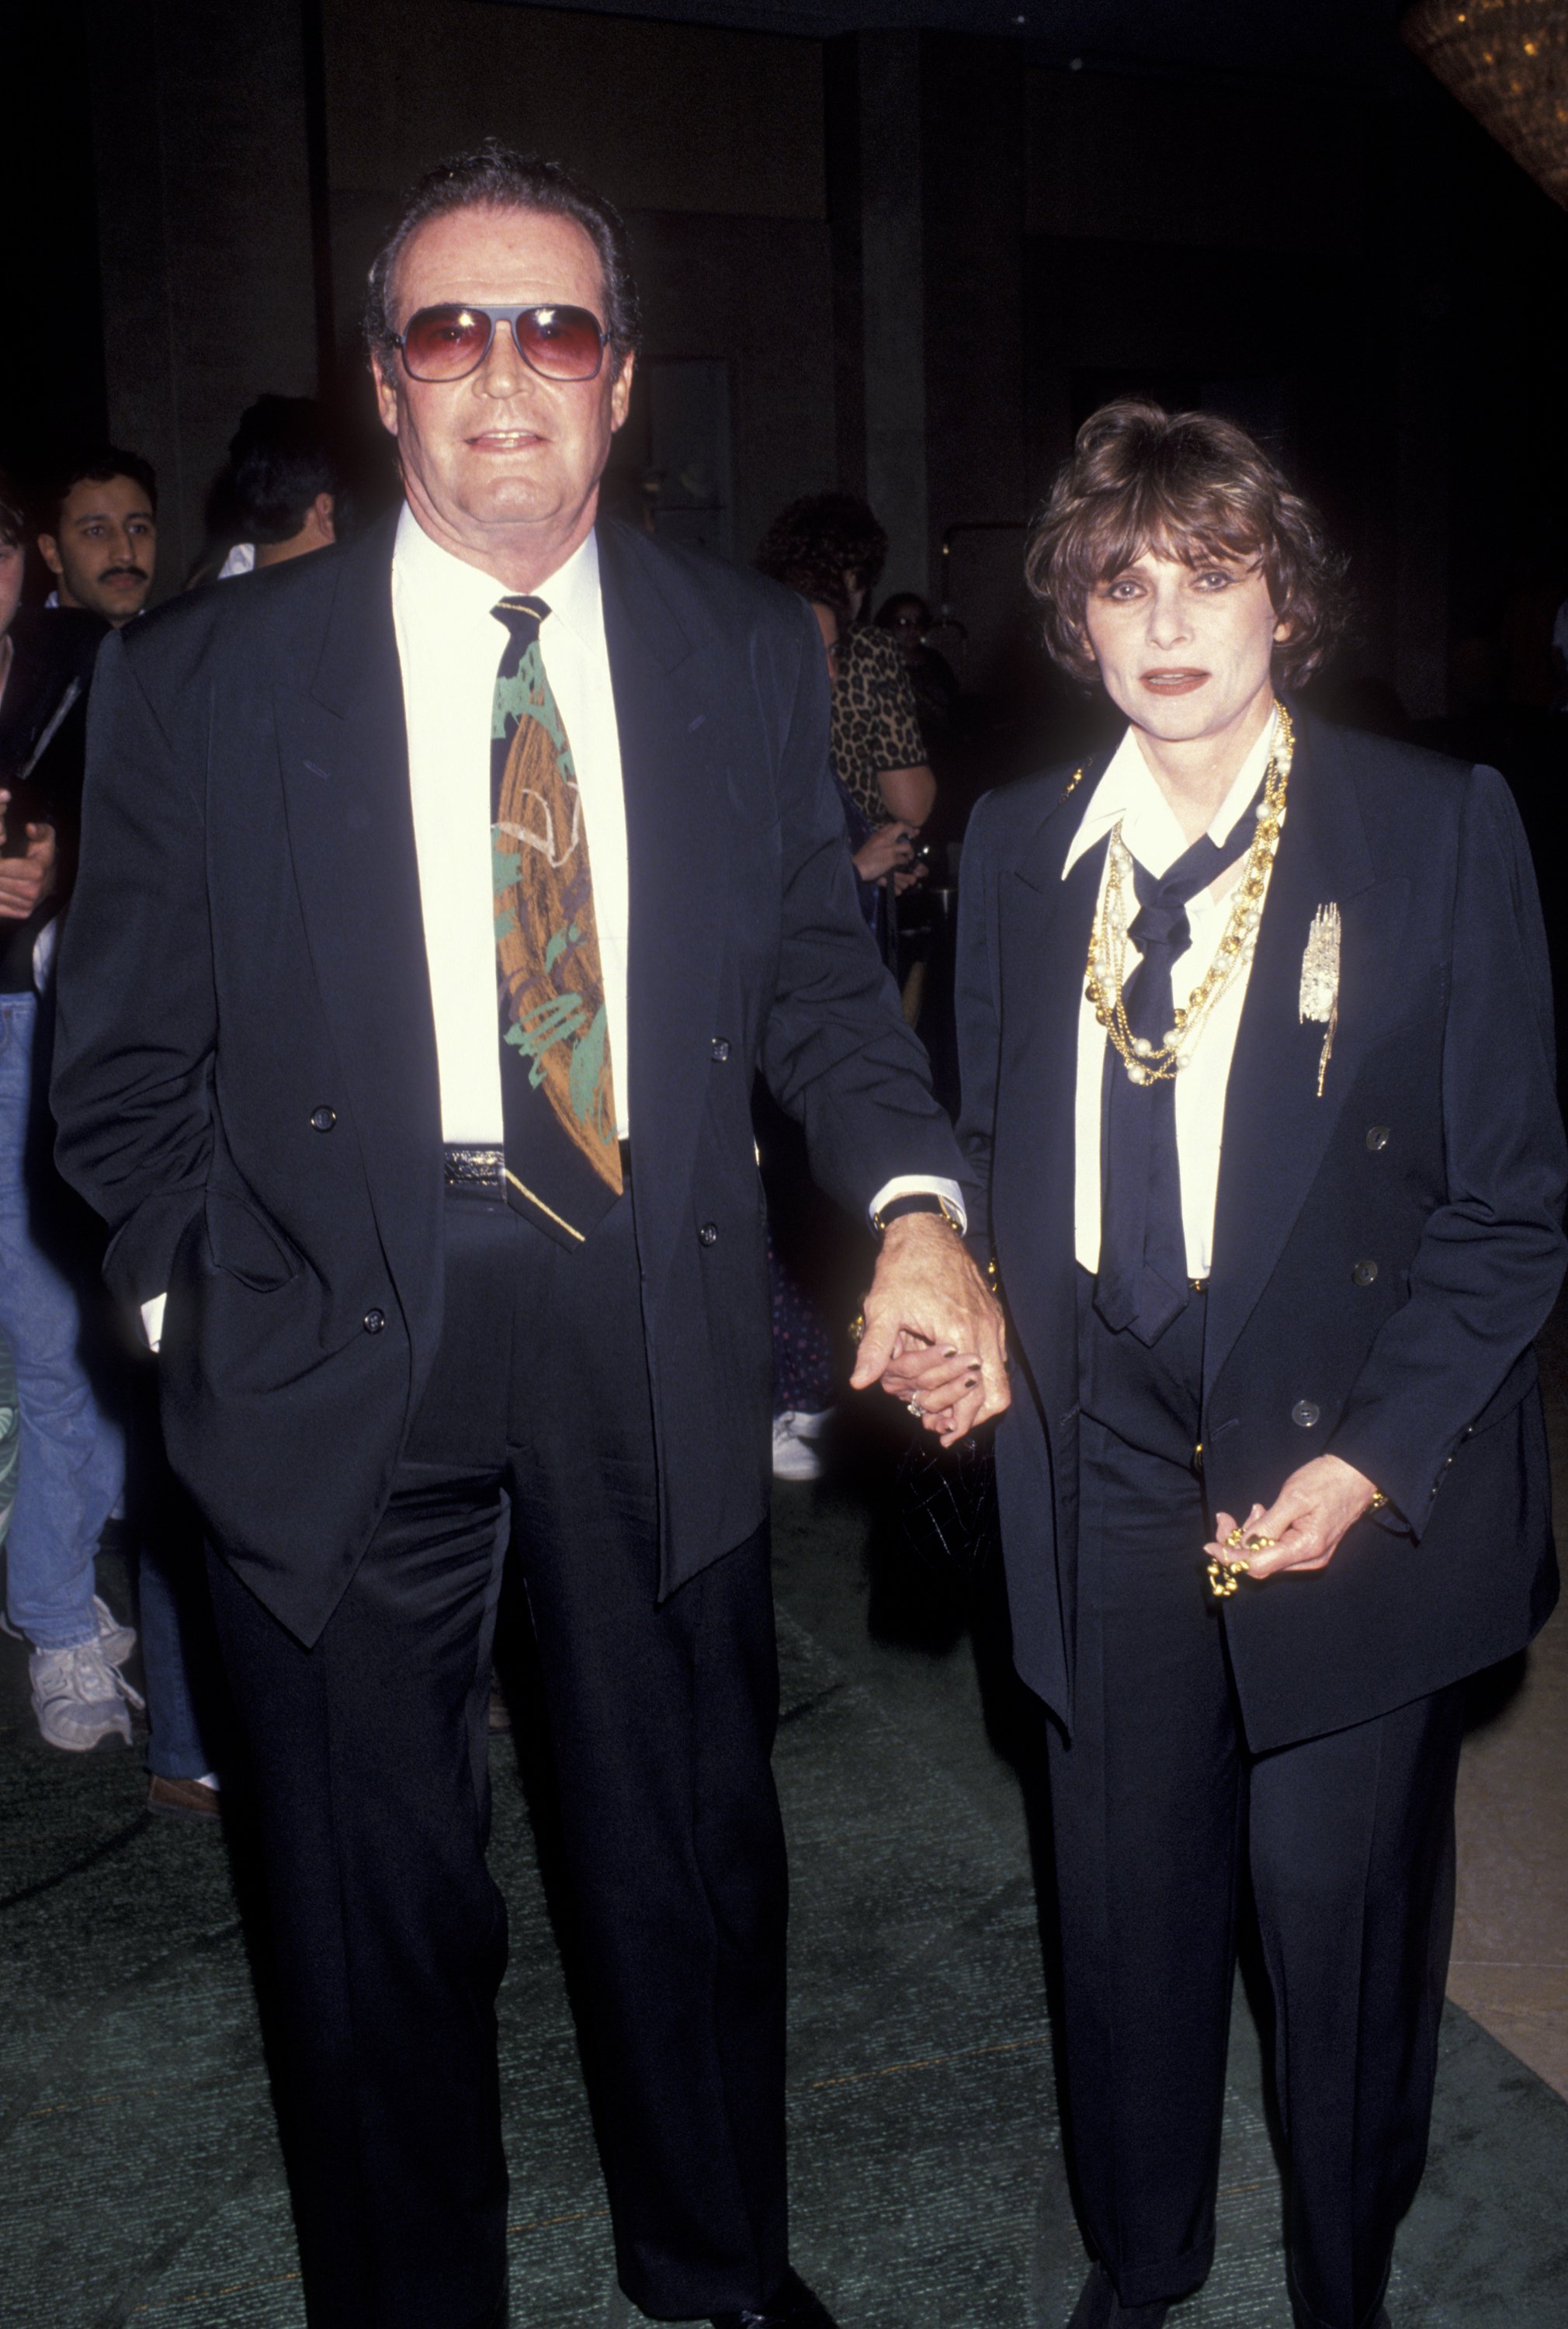 Actor James Garner and wife Lois Clarke attend American Oceans Campaign Fundraiser on March 24, 1993, at the Beverly Hilton Hotel in Beverly Hills, California. | Source: Getty Images